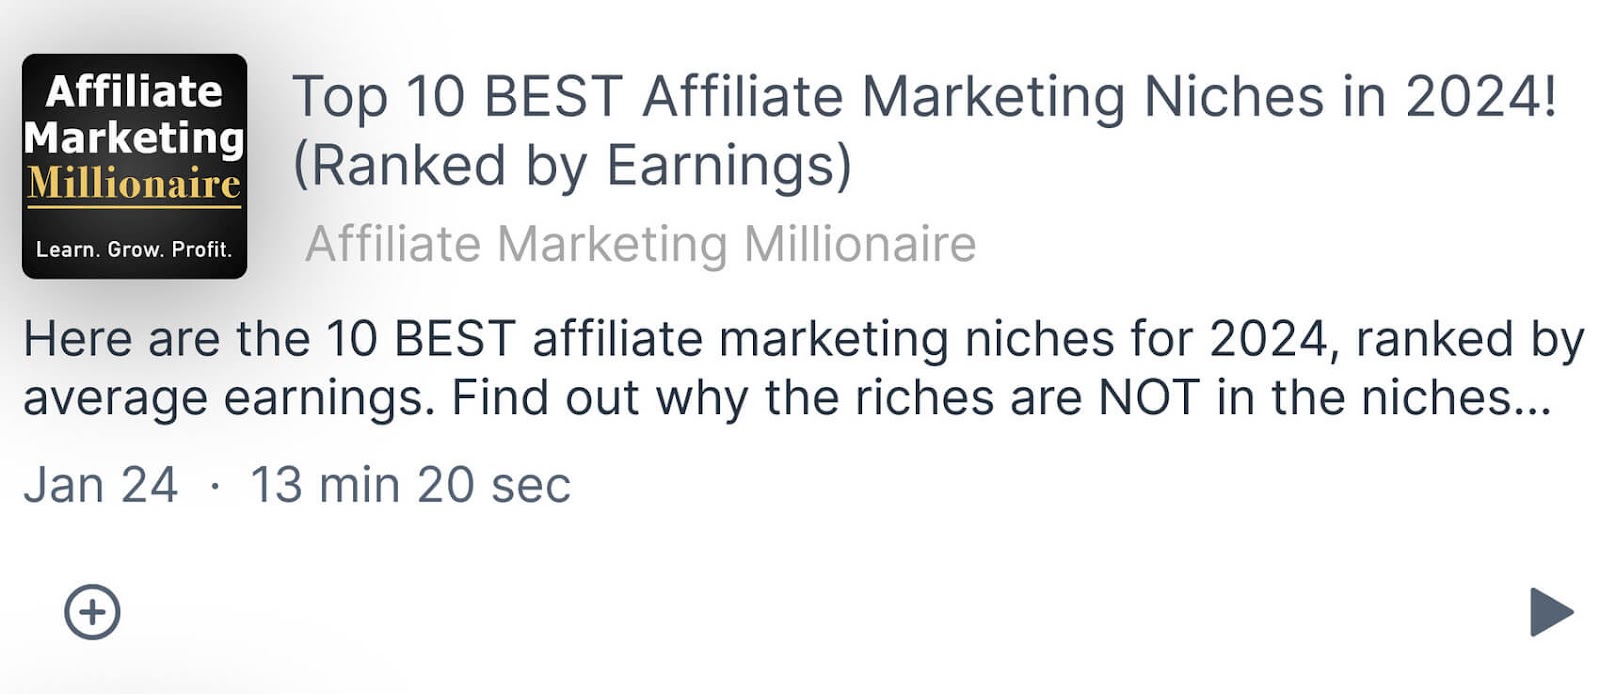 Affiliate Marketing Millionaire's podcast titled "Top 10 Best Affiliate Marketing Niches in 2024!"